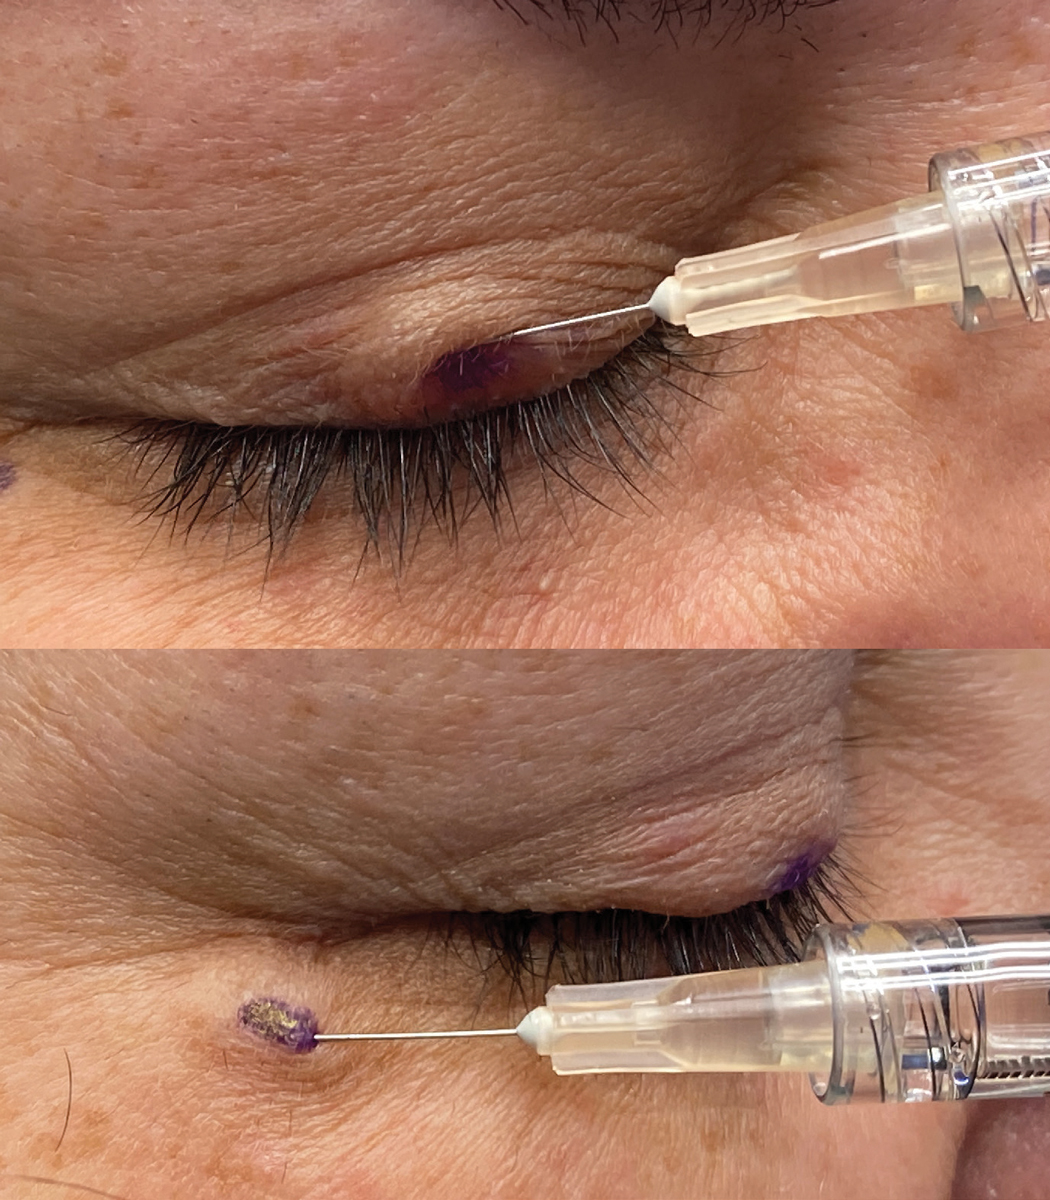 Figs. 4 and 5. At top, injection of botox in the central upper lid in the pretarsal portion of the orbicularis. A 30-gauge needle on a 1cc syringe is being used. At bottom, injection of botox along the temporal aspect of the orbicular muscle. Notice the shallow approach of the needle to the injection site and the wheal of medication being injected very superficially just below the skin.